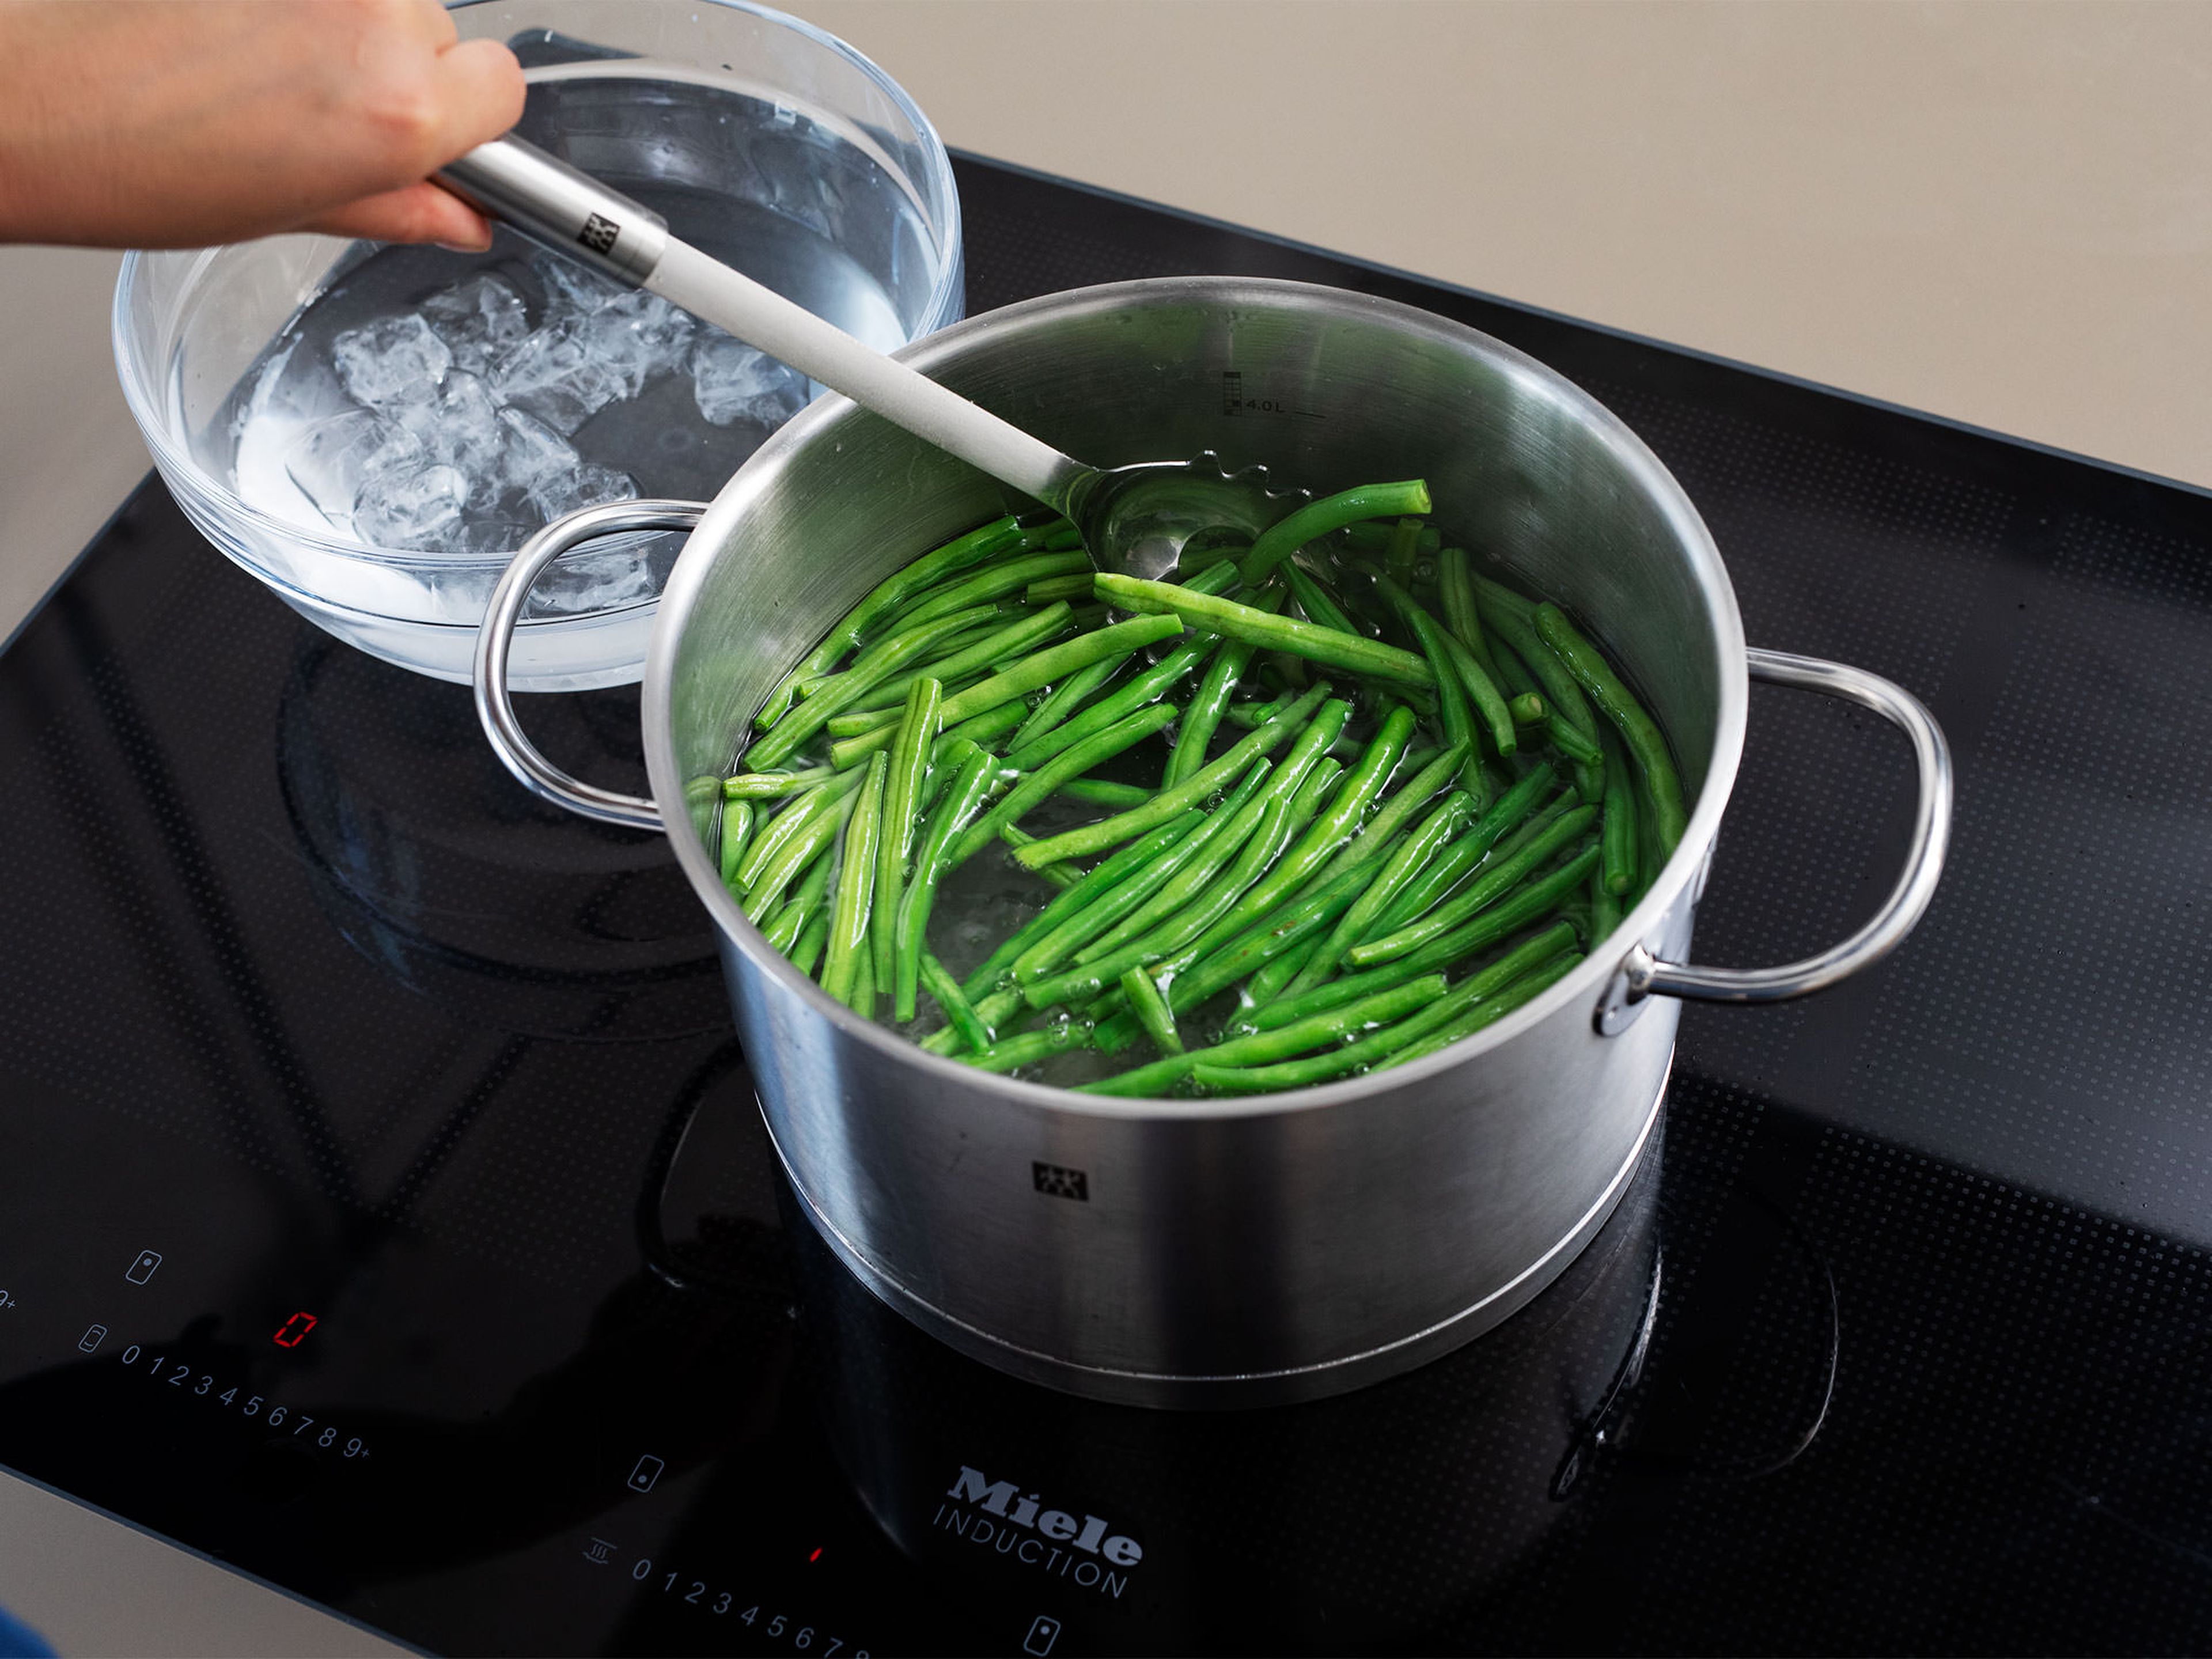 Trim green beans. Boil a large pot of water with plenty of salt. Blanch green beans for approx. 2 min., then transfer to a bowl of ice water to stop the cooking process. Remove from water, transfer to another bowl, and set aside.